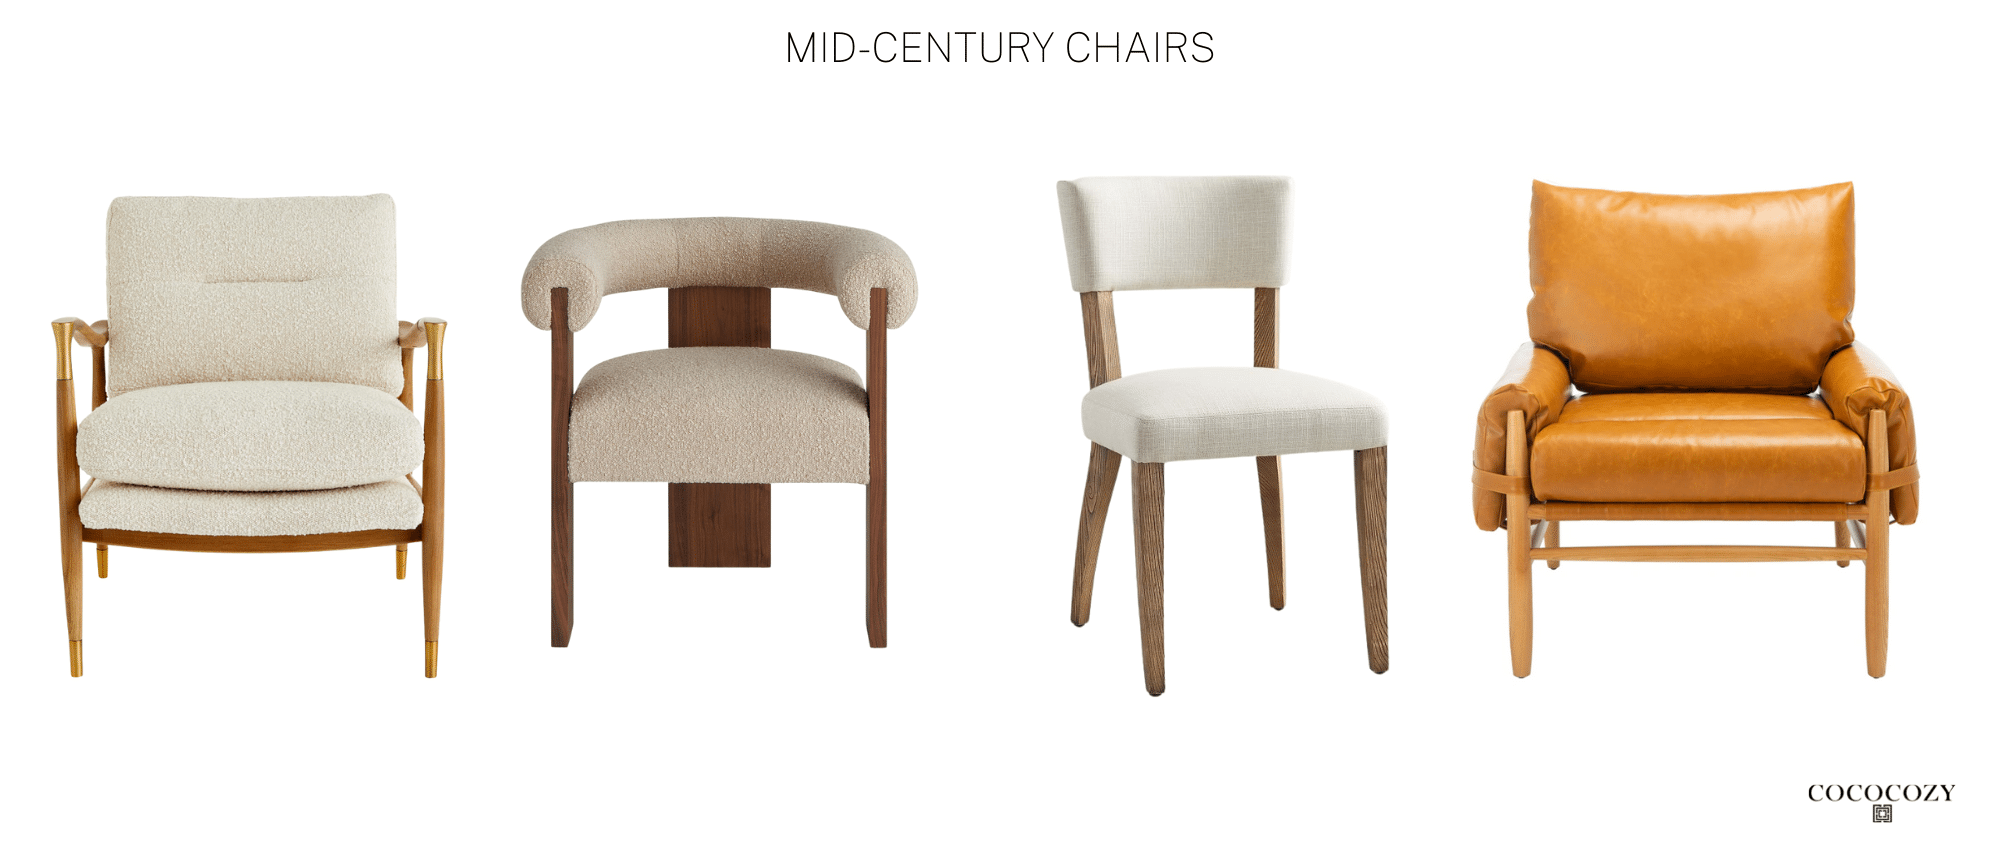 Alt tag for mid-century-chairs-armchairs-leather-camel-wood-cococozypng